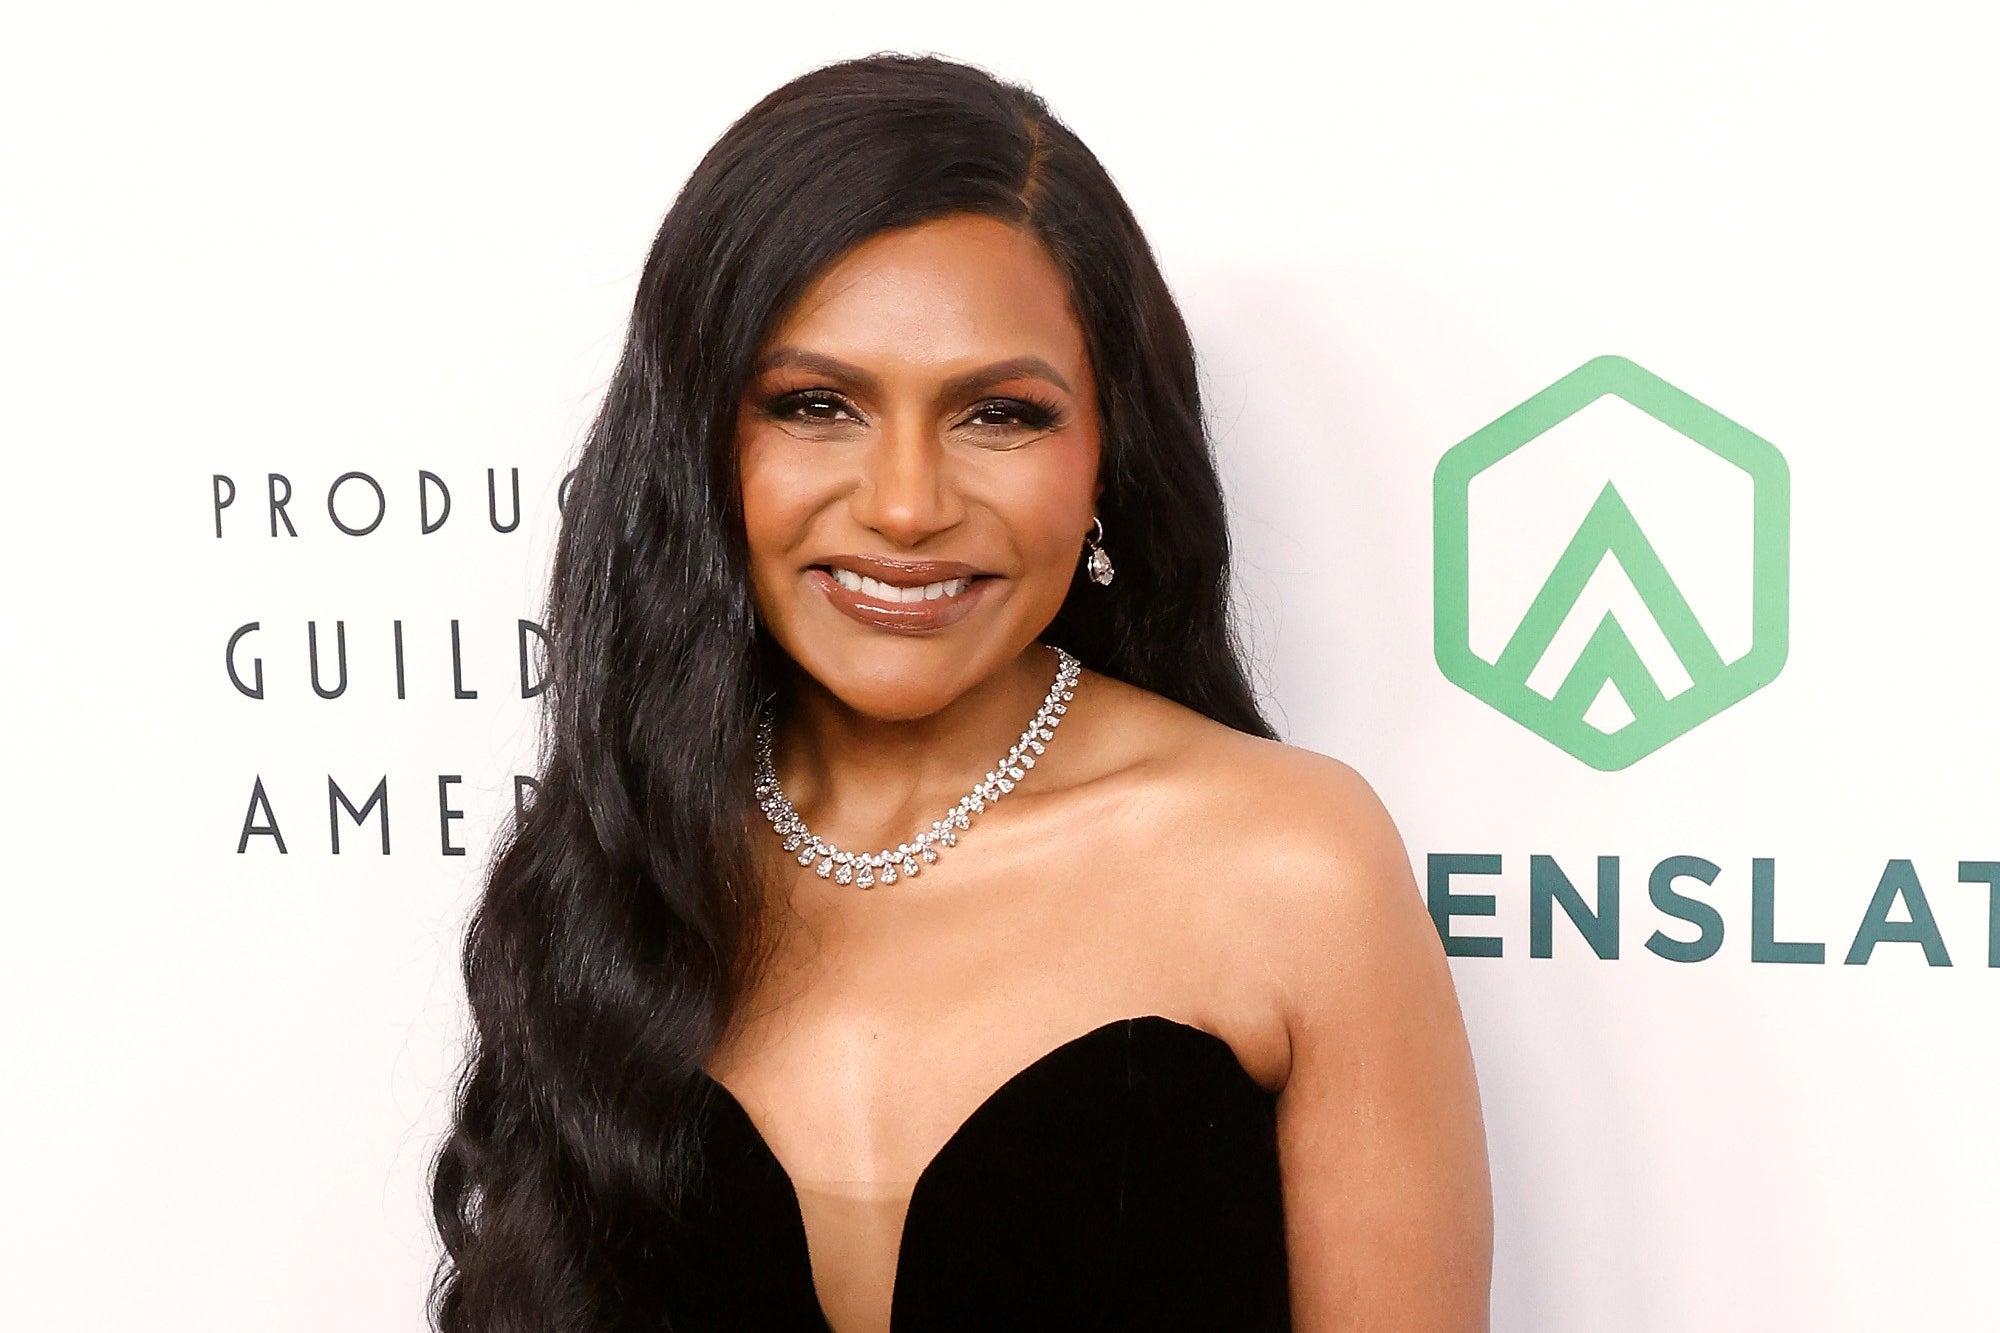 Mindy Kaling attends the Producers Guild Awards